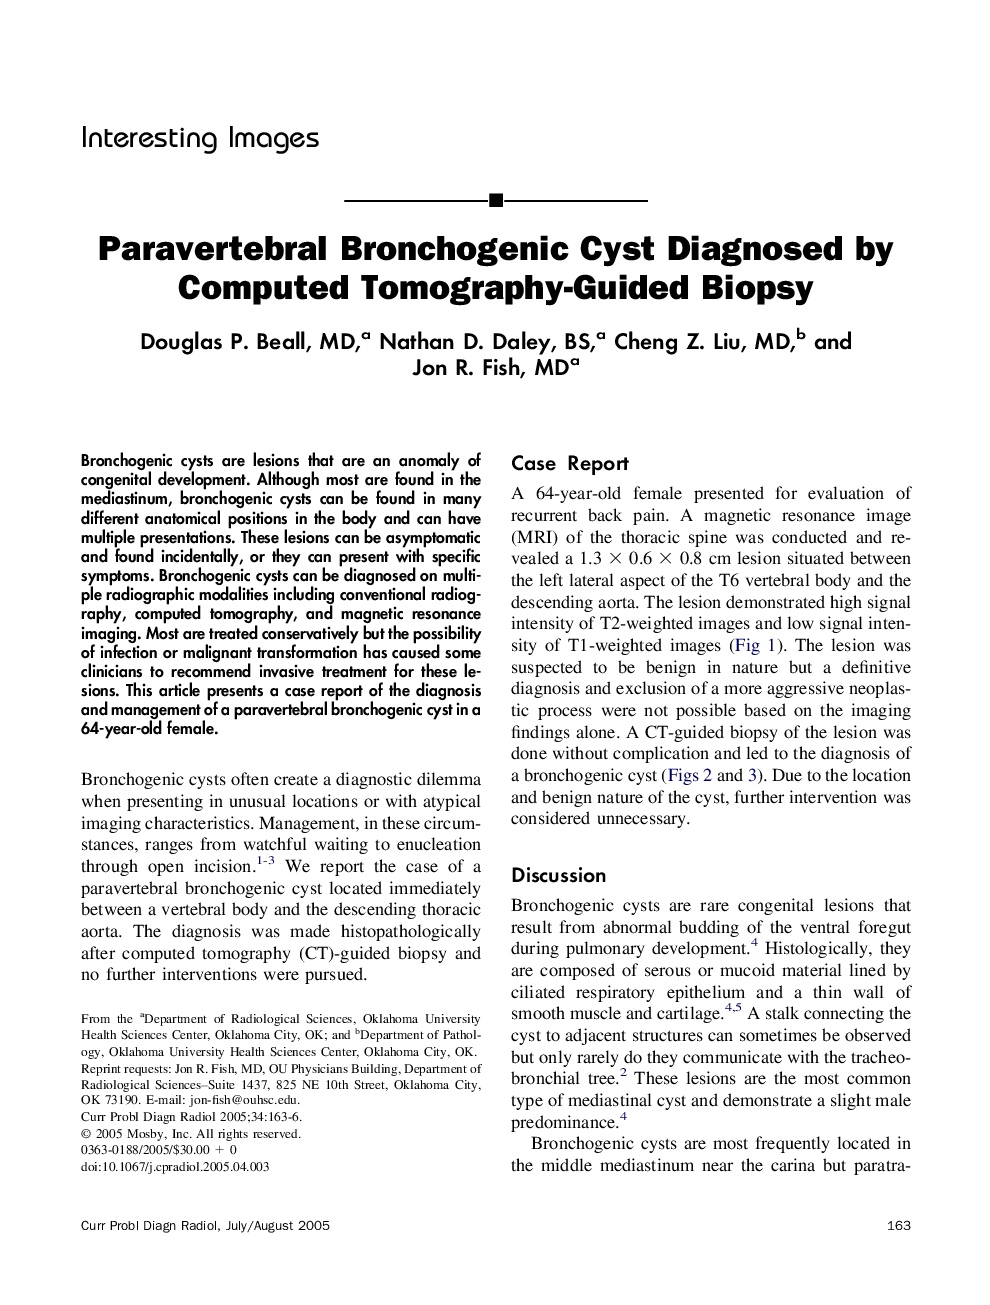 Paravertebral Bronchogenic Cyst Diagnosed by Computed Tomography-Guided Biopsy